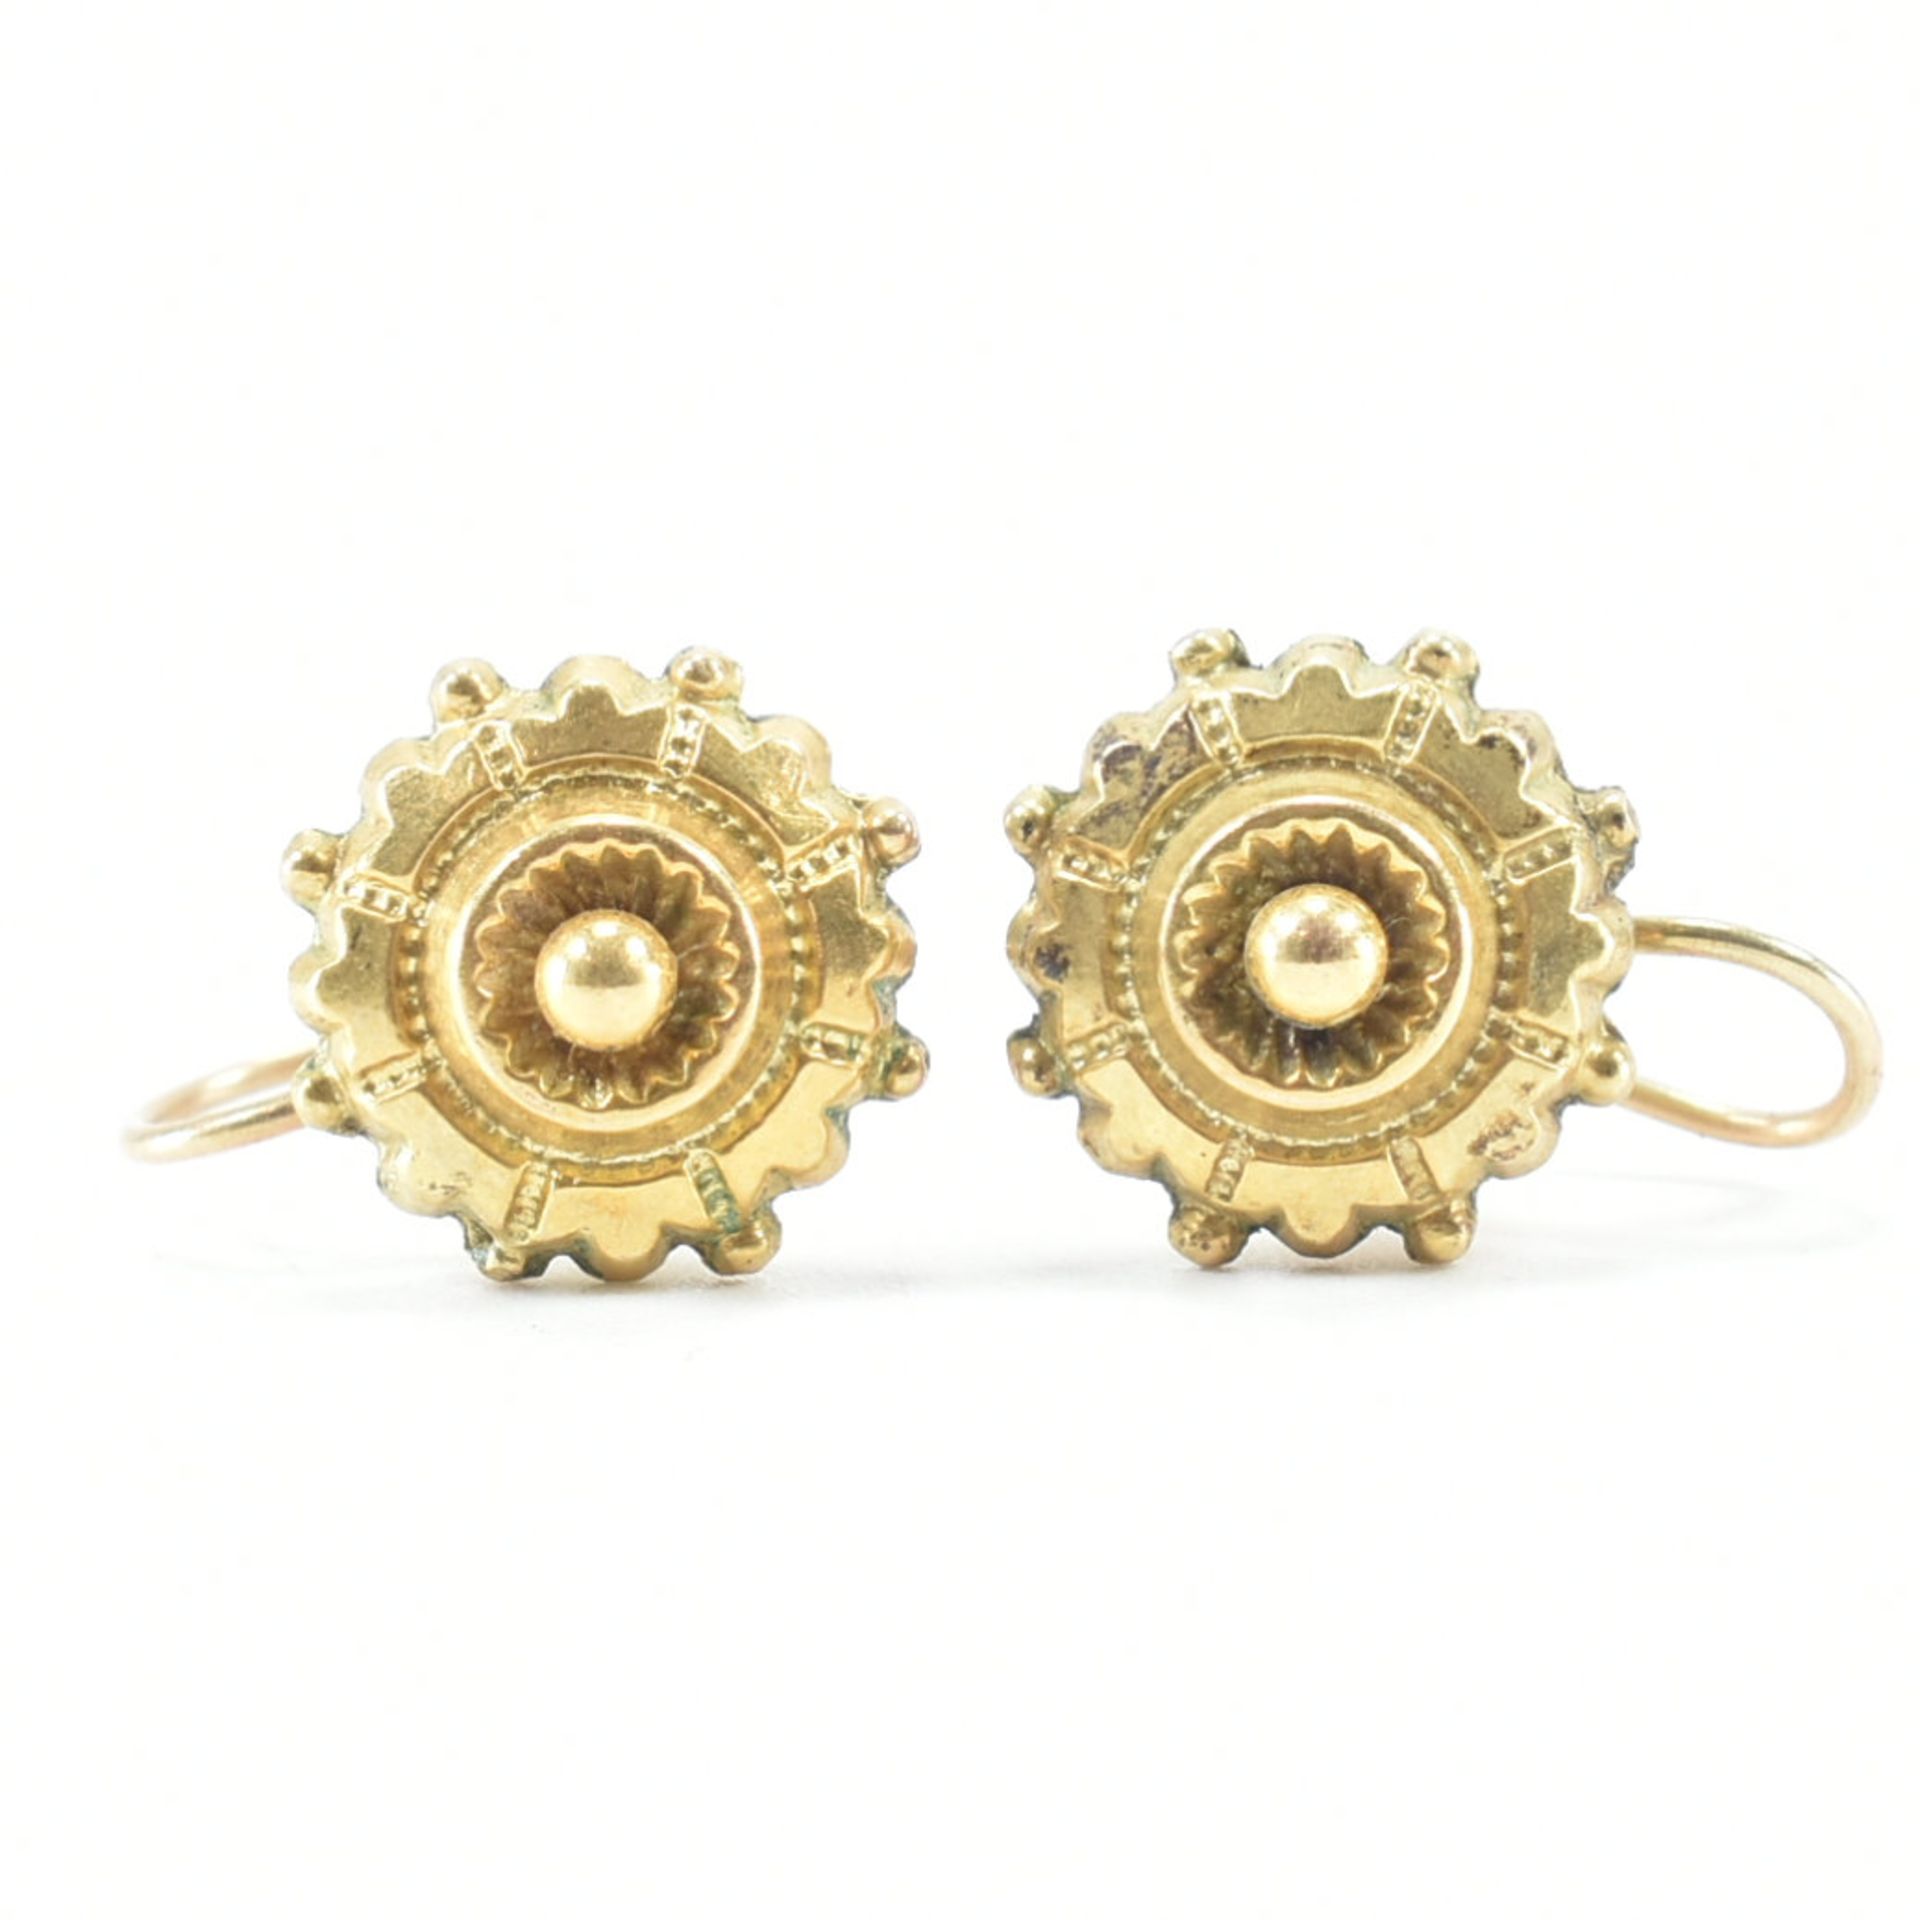 19TH CENTURY 9CT GOLD SCREW BACK EARRINGS - Image 2 of 6